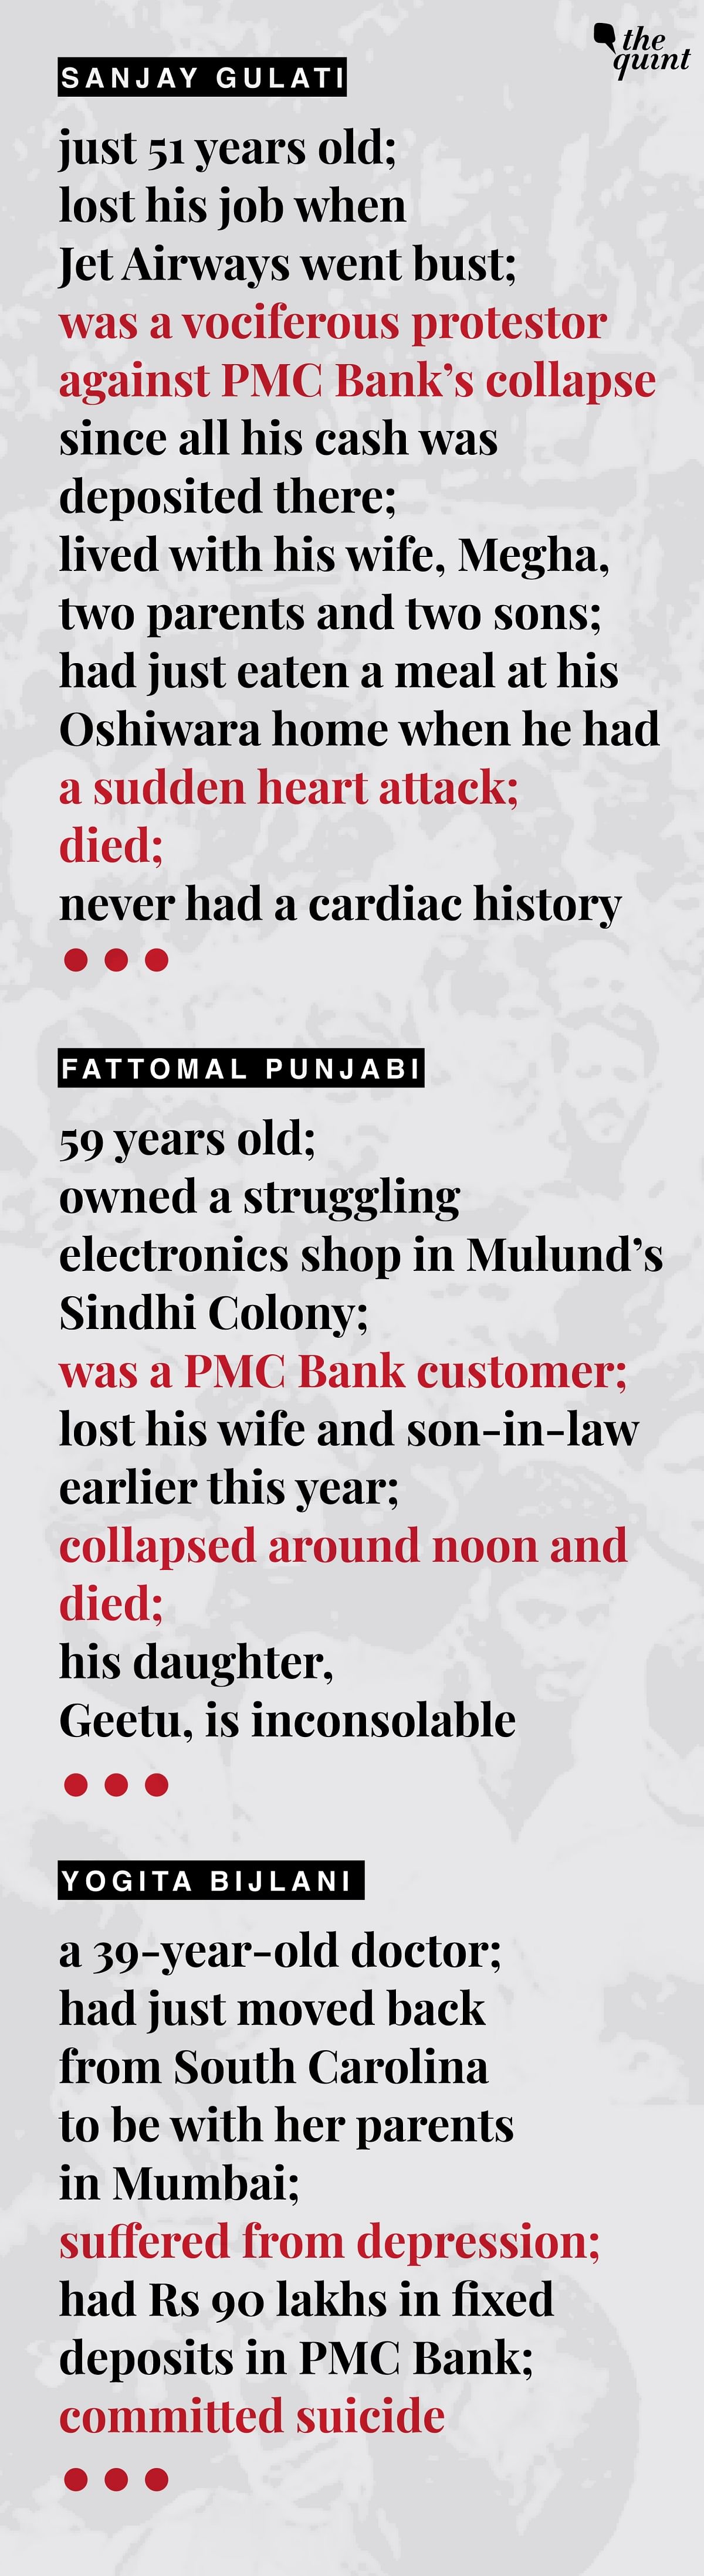 PMC depositors shouldn’t be paid out insurance on a rate decided in 1993.